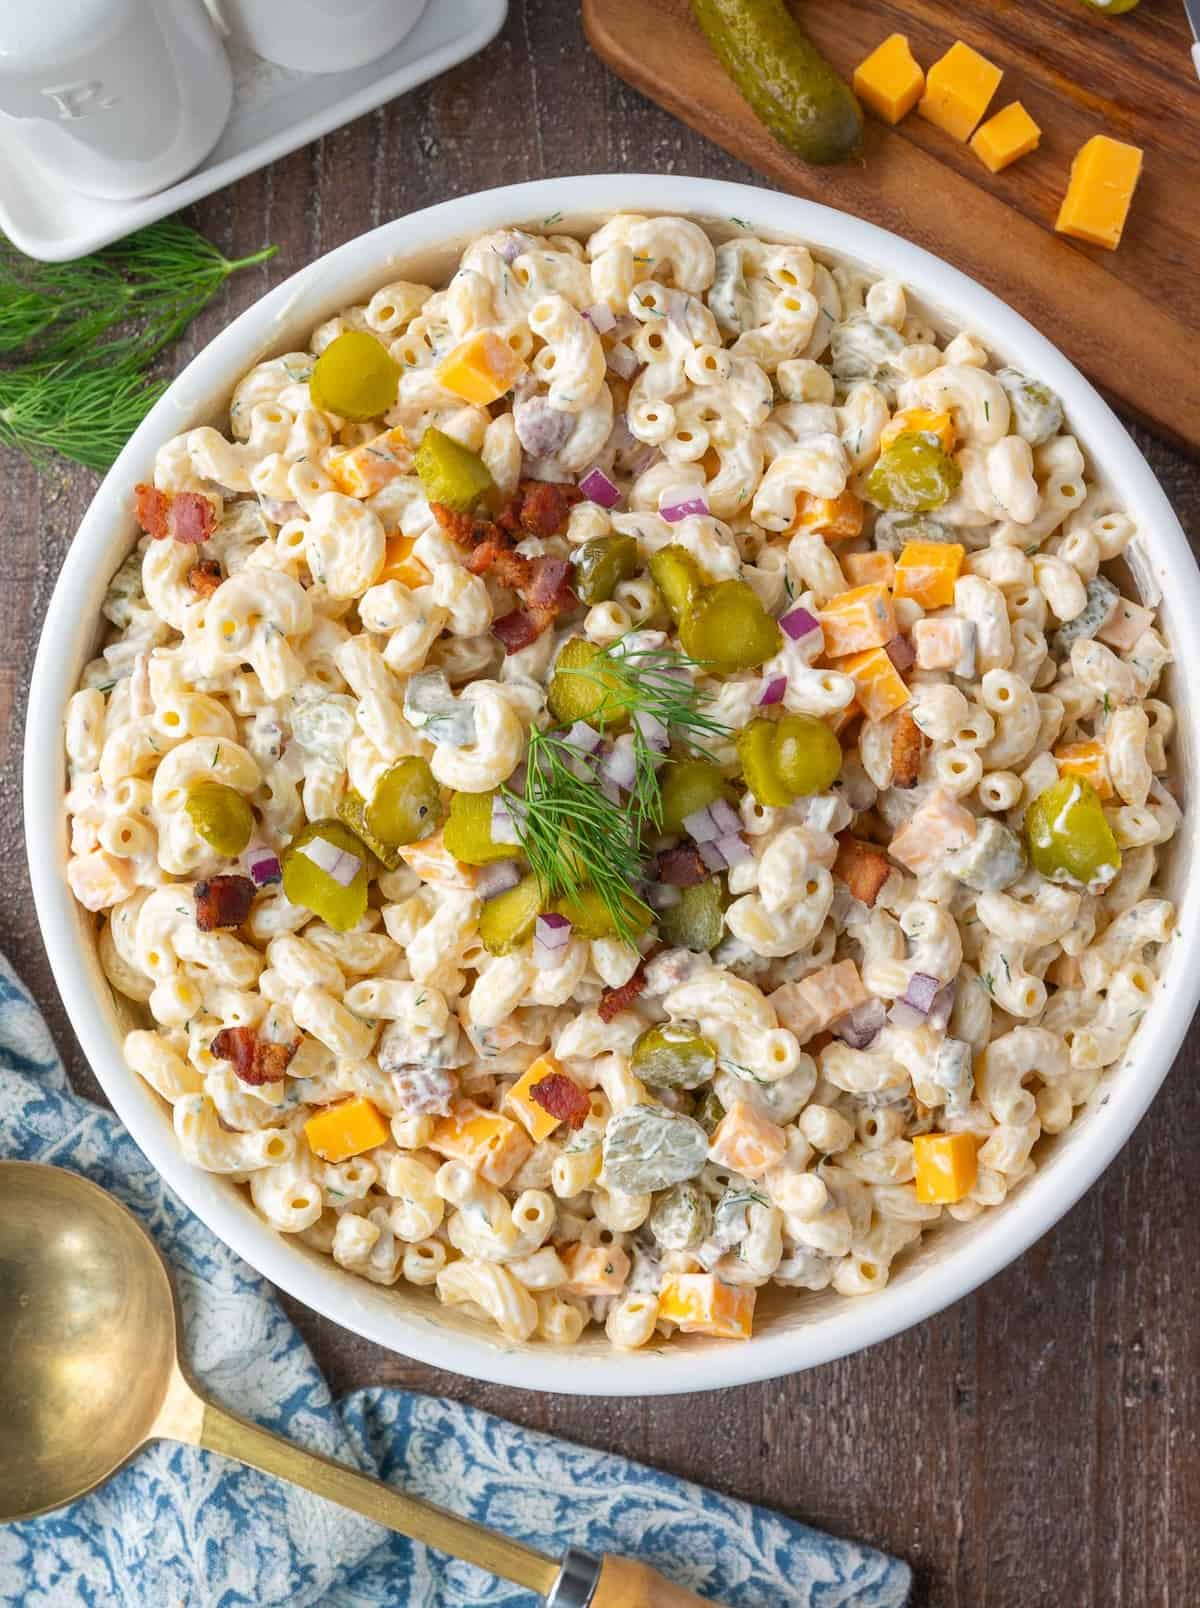 Dill pickle pasta salad in a white serving bowl.